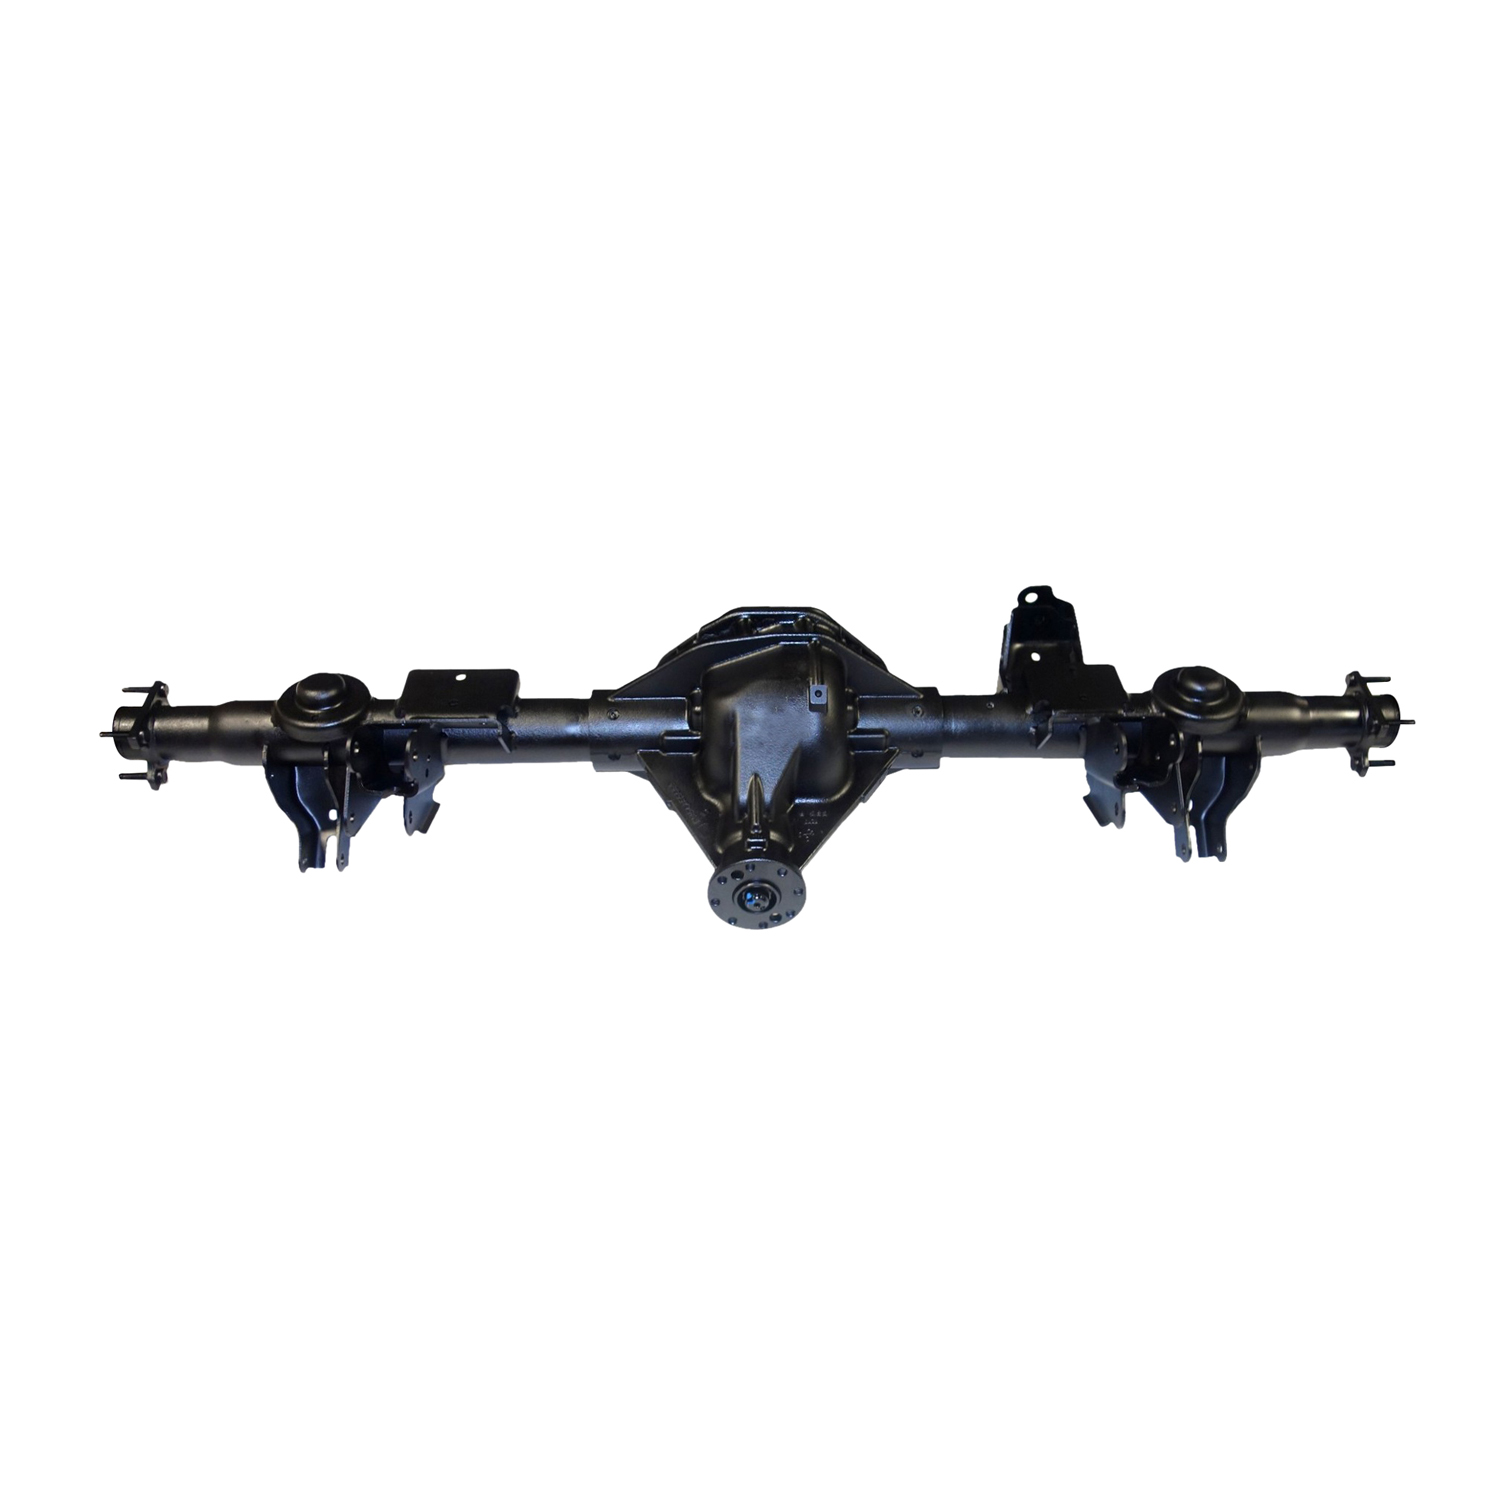 Reman Axle Assembly for Chrysler 9.25ZF 13-14 Dodge Ram 1500 3.21 Ratio